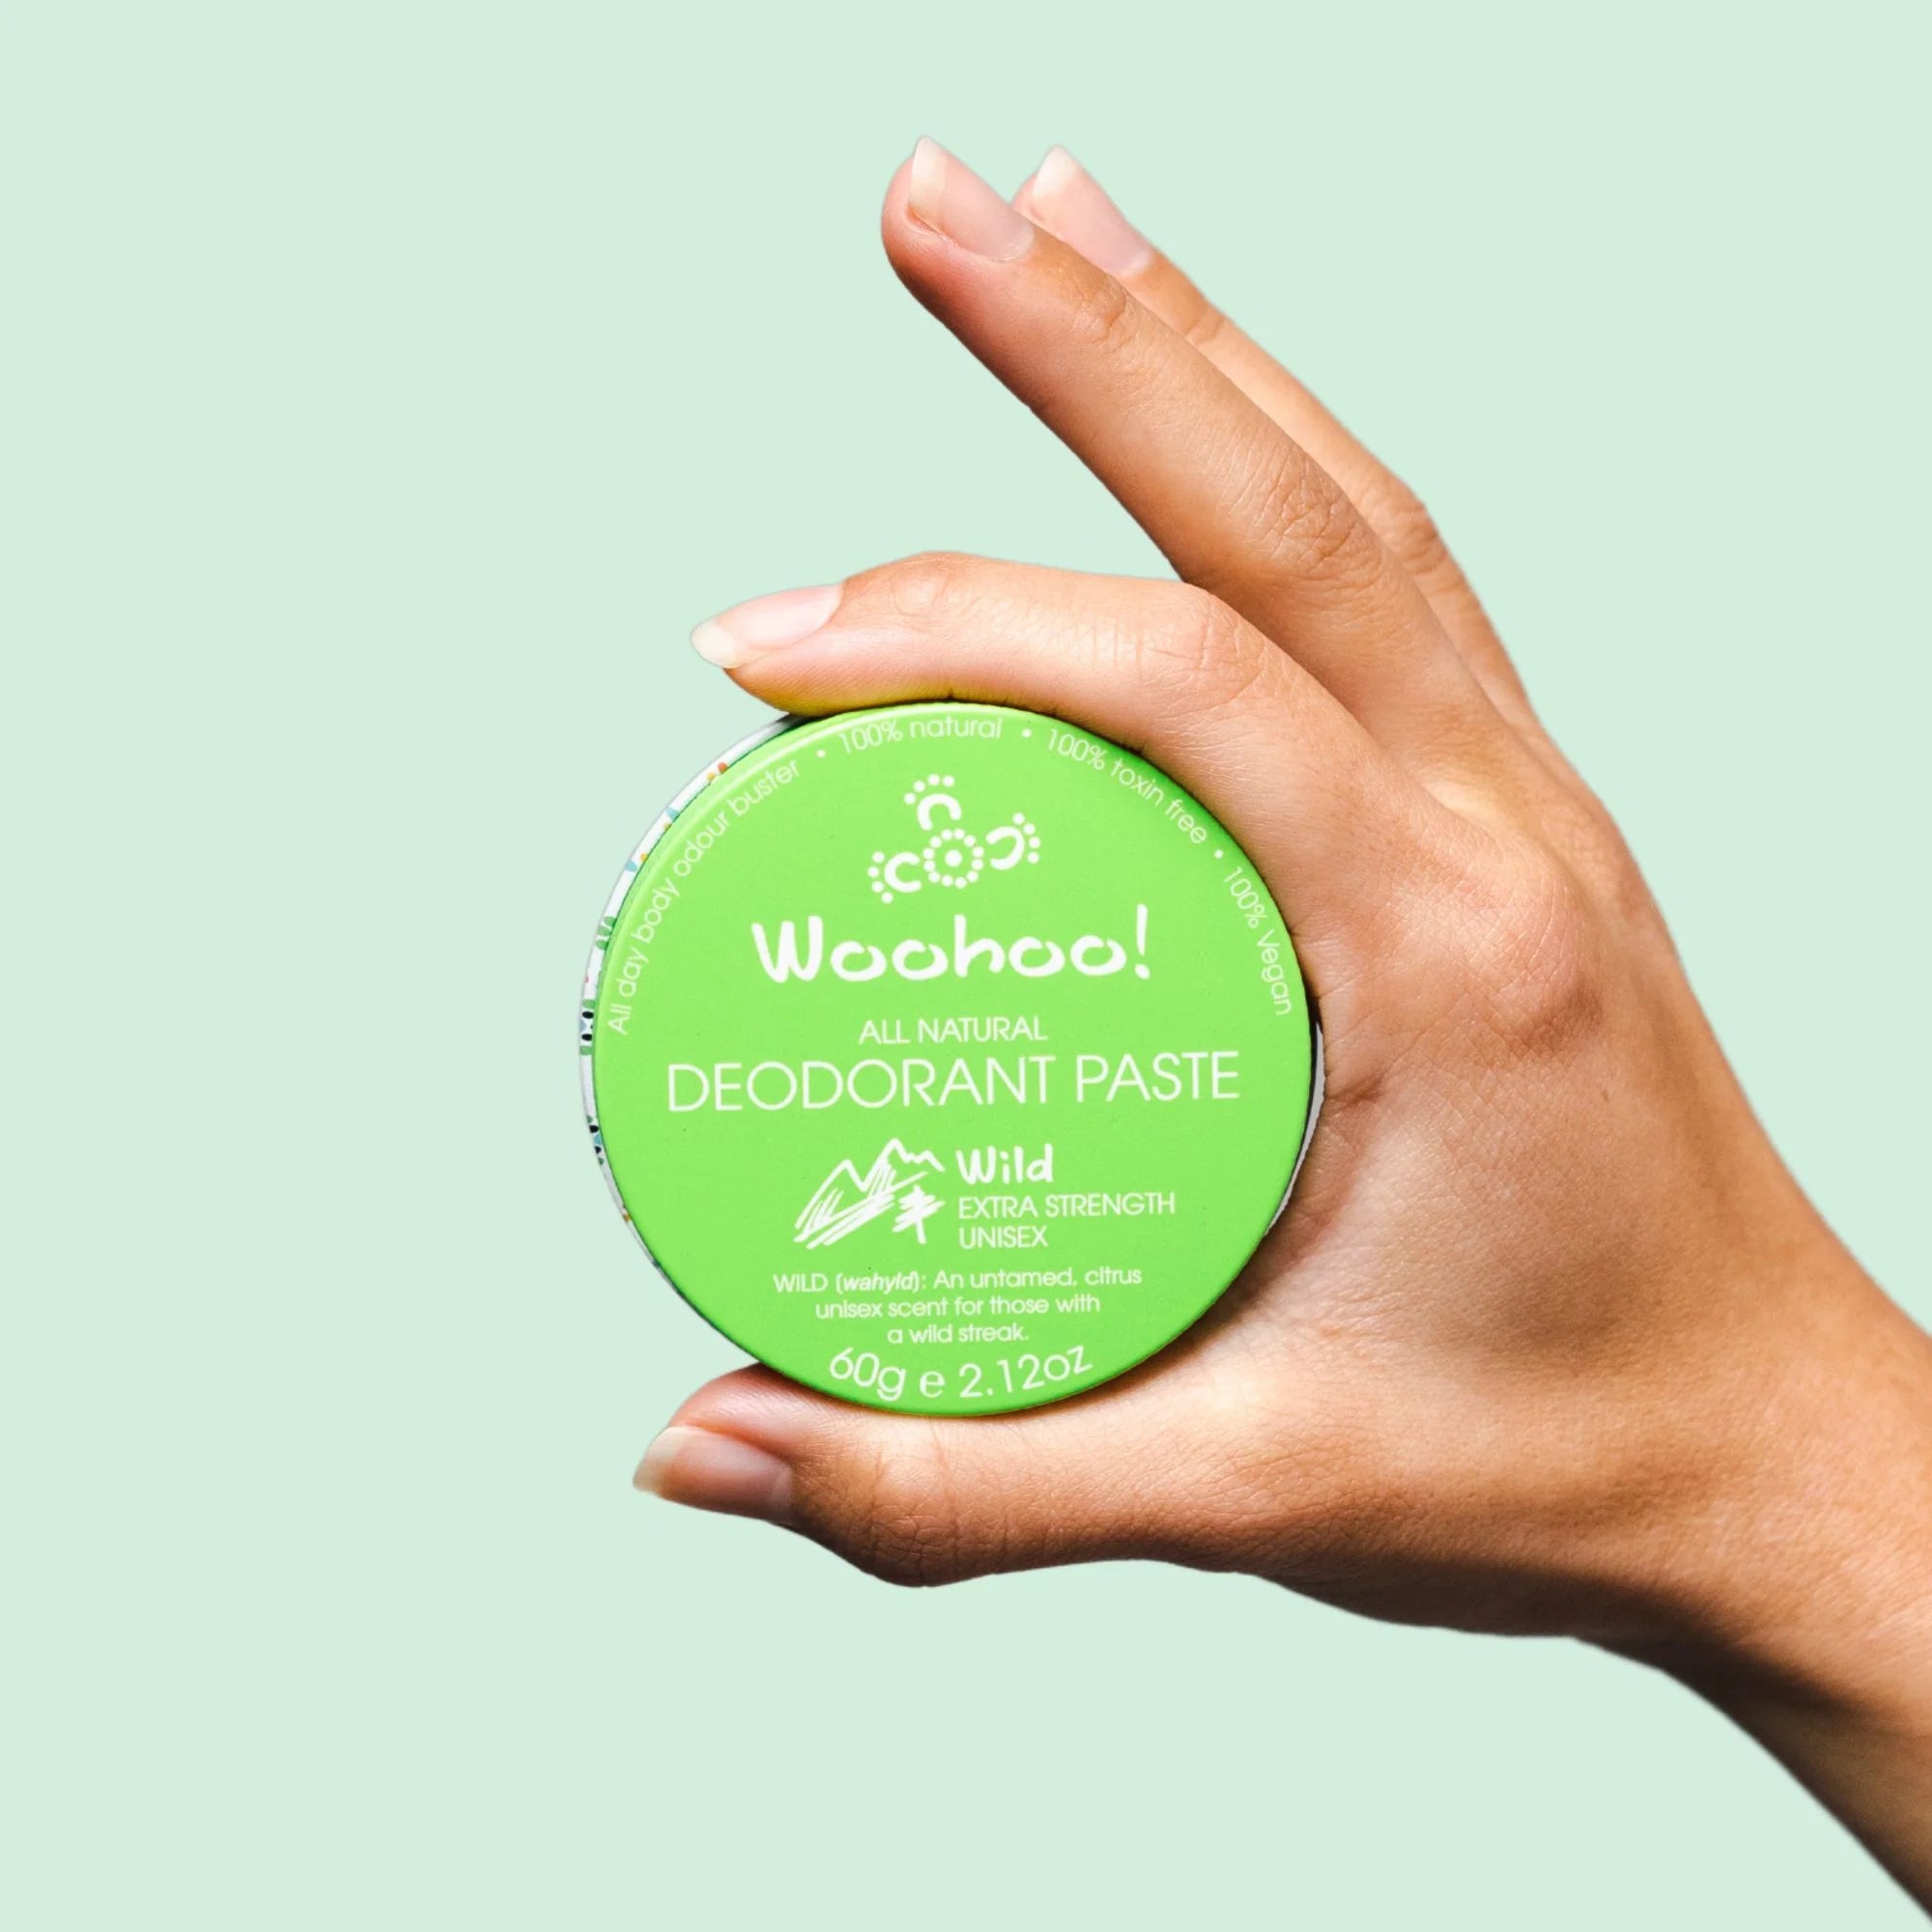 Image of the Woohoo Wild Natural Deodorant Paste tin being held in a hand on a light green background